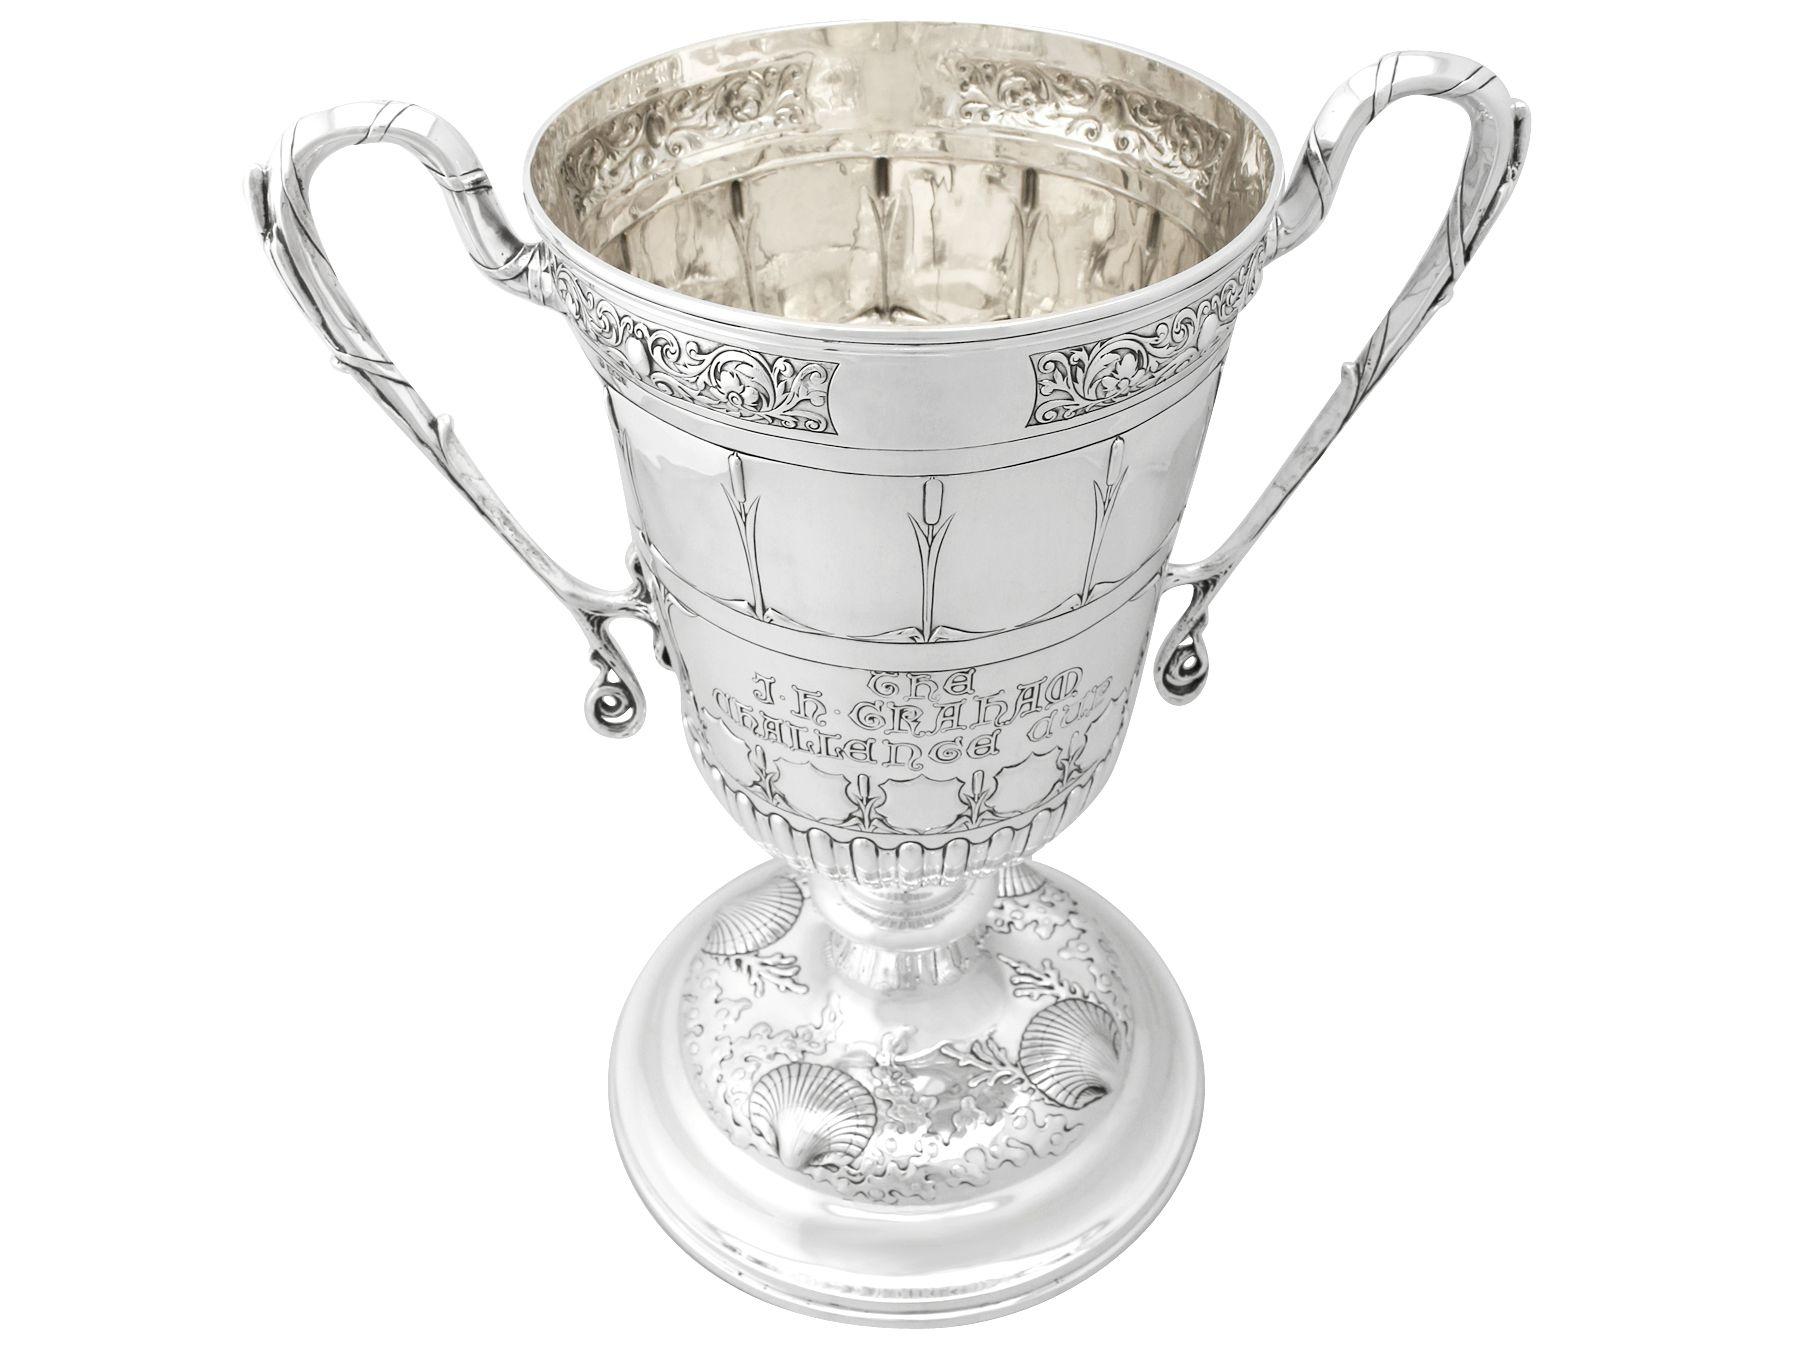 Antique Edwardian Sterling Silver Presentation or Champagne Cup and Cover In Excellent Condition For Sale In Jesmond, Newcastle Upon Tyne